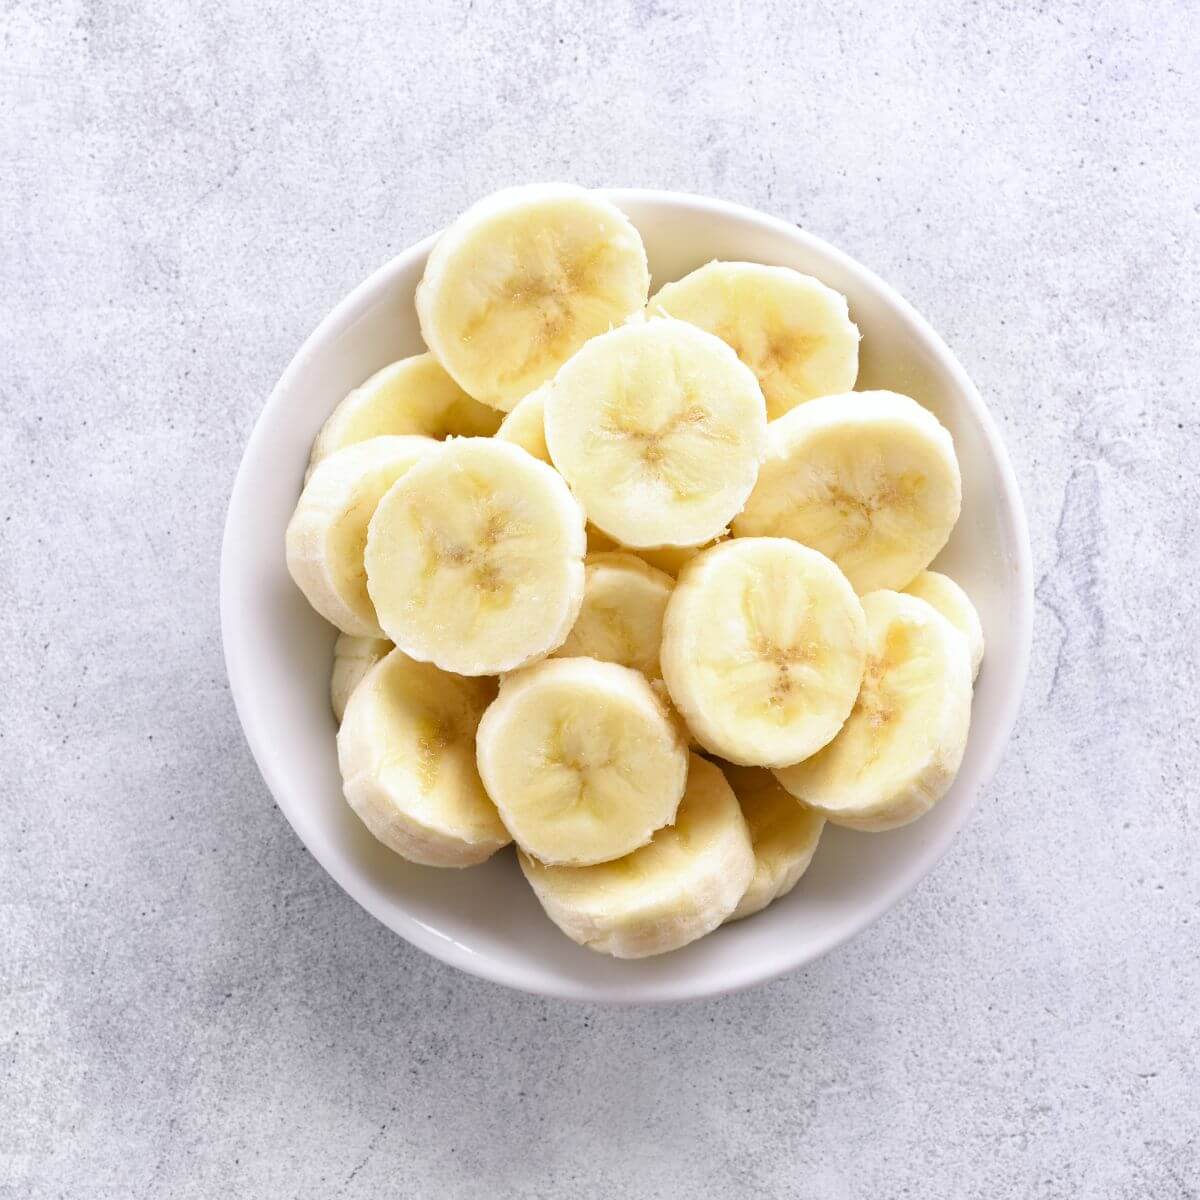 Nutritional breakdown and facts on bananas.